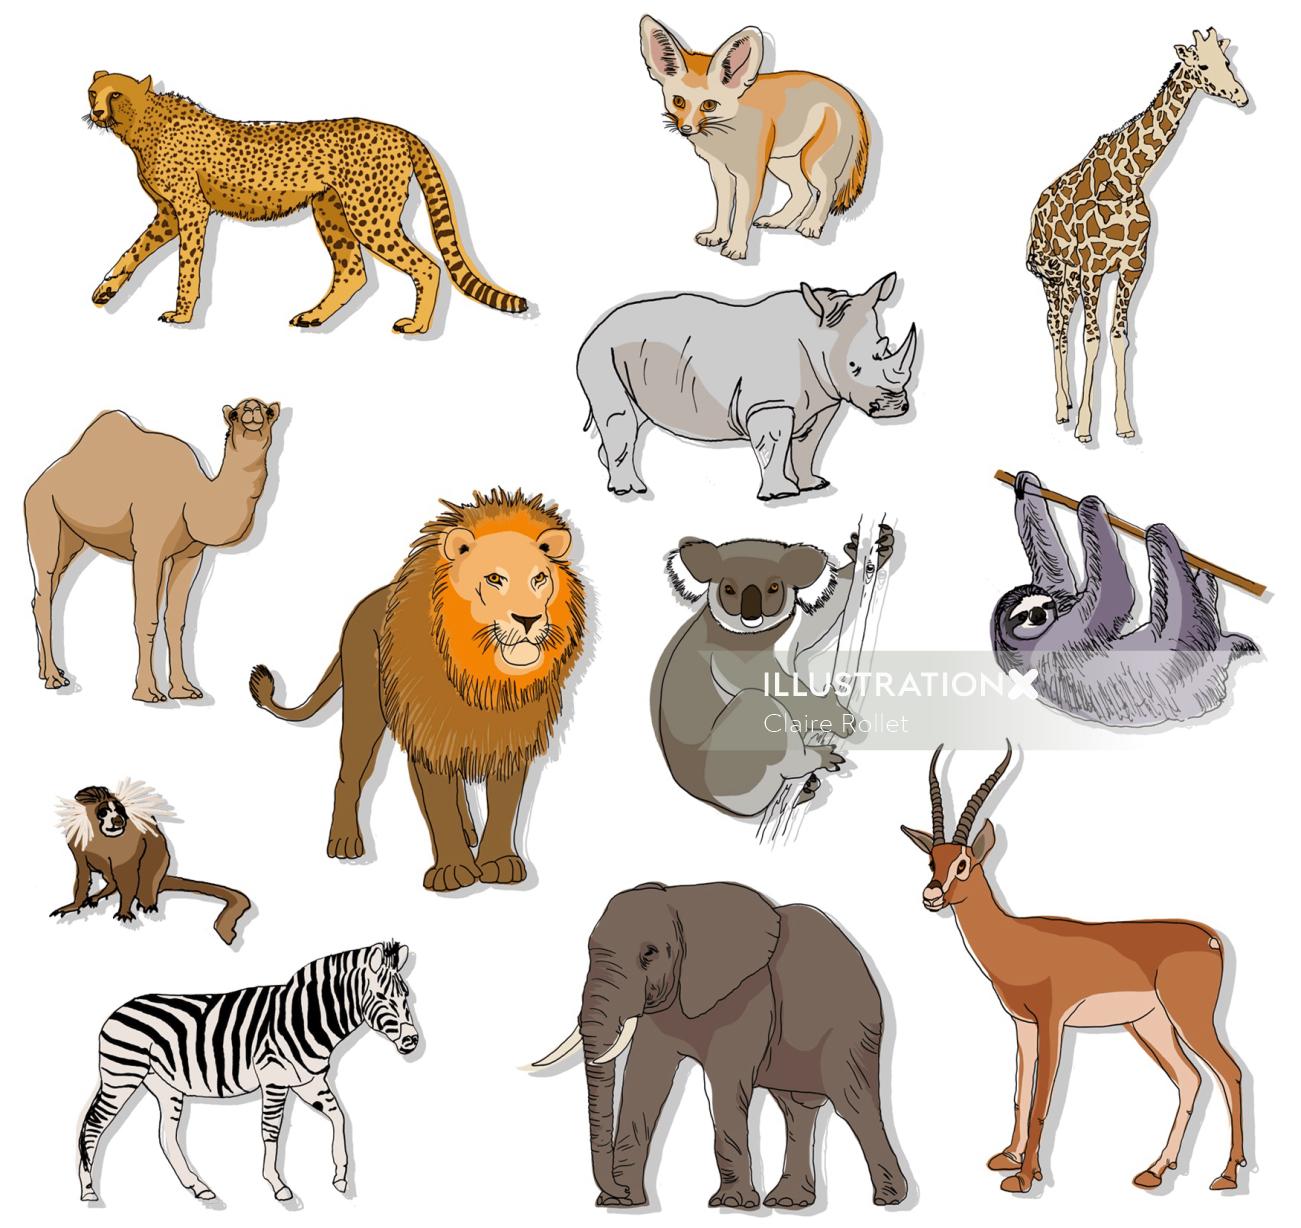 Warm-climate animal species are shown in this drawing